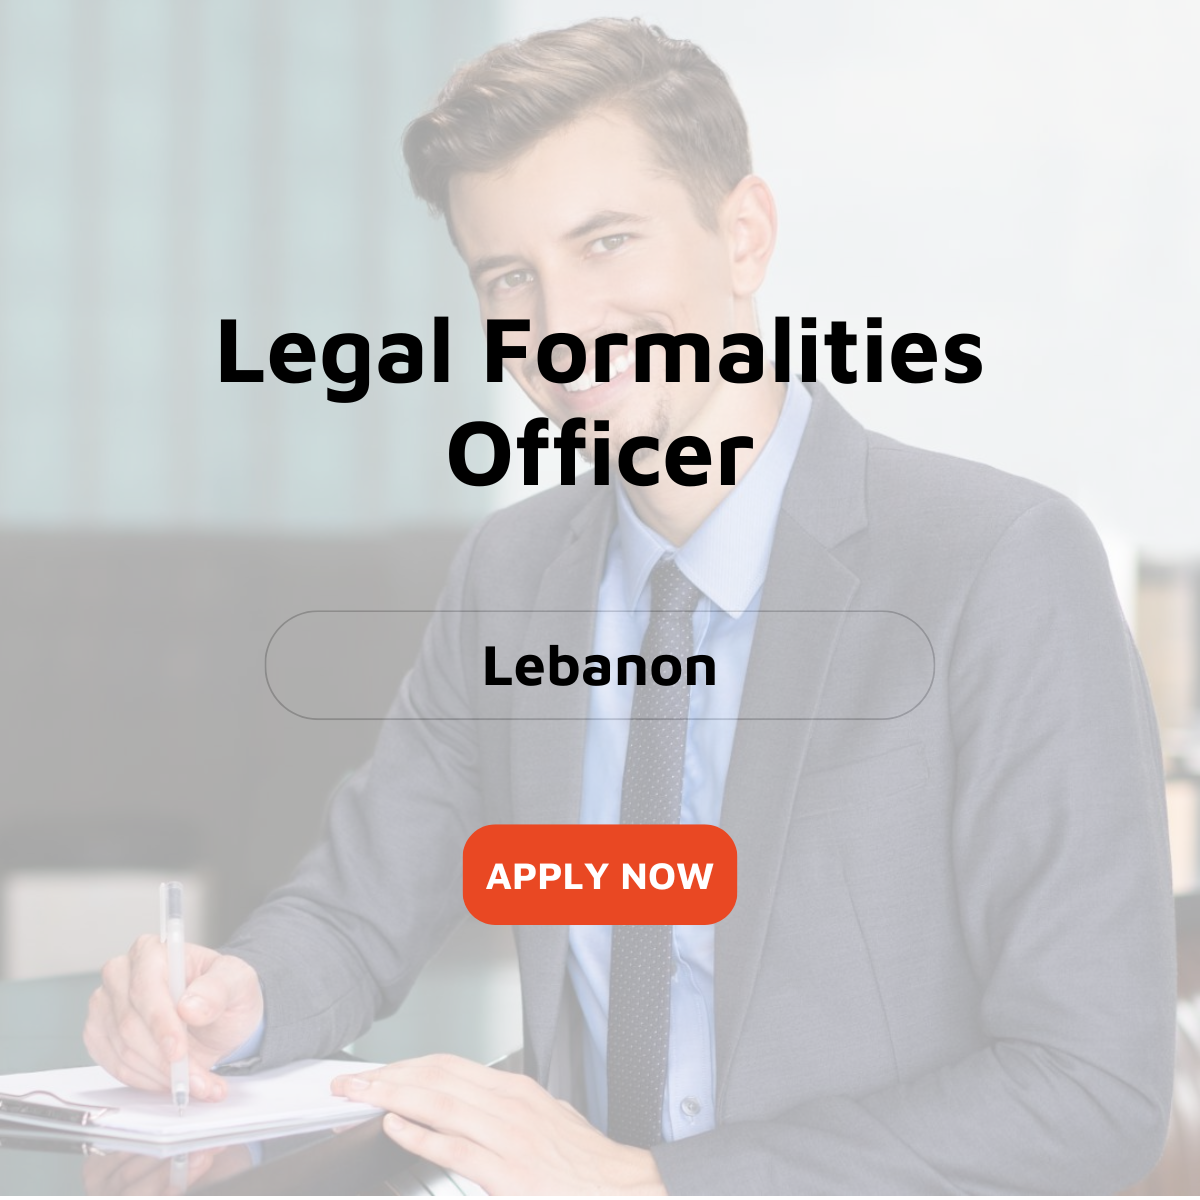 Legal Formalities Officer